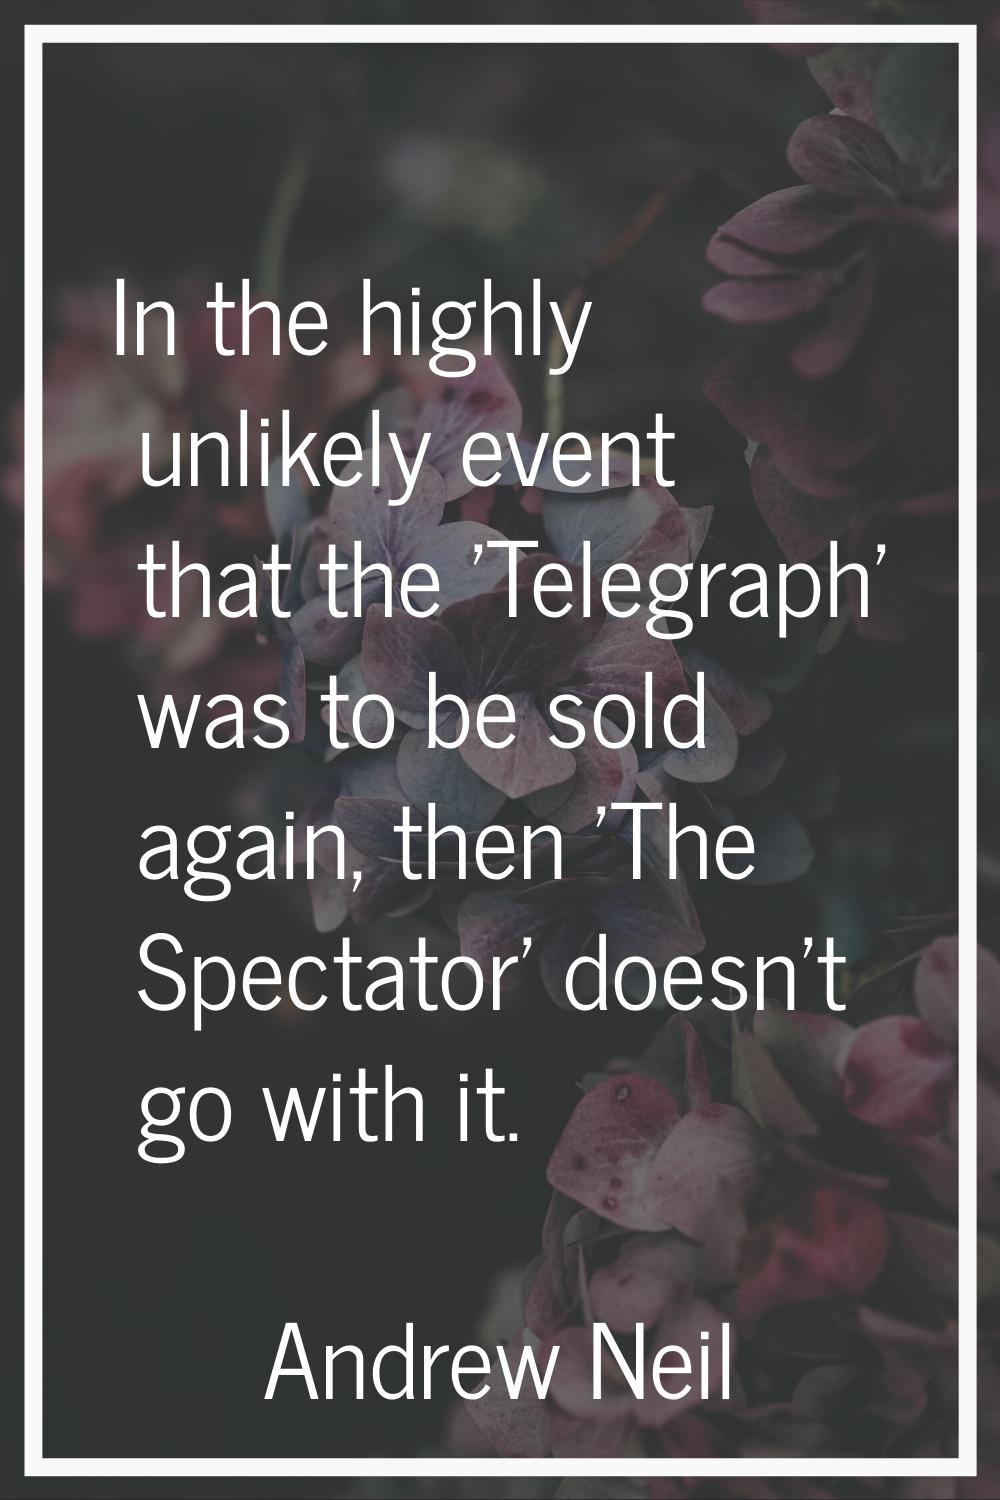 In the highly unlikely event that the 'Telegraph' was to be sold again, then 'The Spectator' doesn'